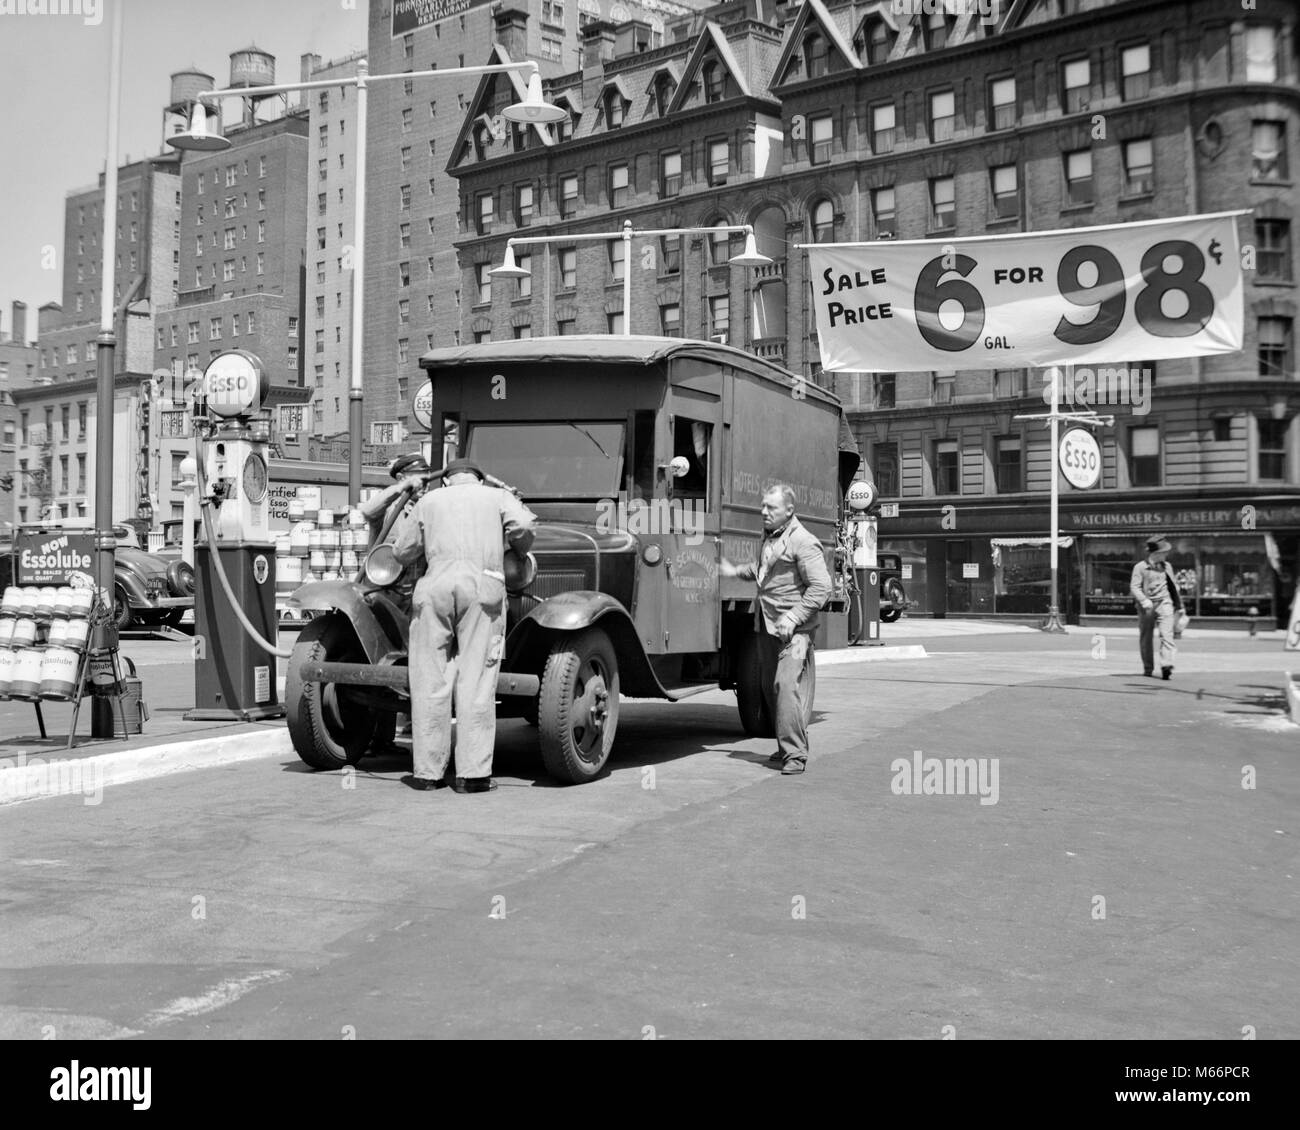 1930s TRUCK FILLING UP AT ESSO GAS STATION ADVERTISING 6 GALLONS FOR 98 CENTS AT BROADWAY & 68th STREET NEW YORK CITY USA - q73971 CPC001 HARS CITIES PRICES VEHICLES NEW YORK CITY SMALL GROUP OF PEOPLE BROADWAY GALLONS PETROLEUM 6 GALLON 68TH 98 98¢ B&W BIG APPLE BLACK AND WHITE CENTS FOSSIL FUEL OCCUPATIONS OLD FASHIONED UPPER WEST SIDE Stock Photo